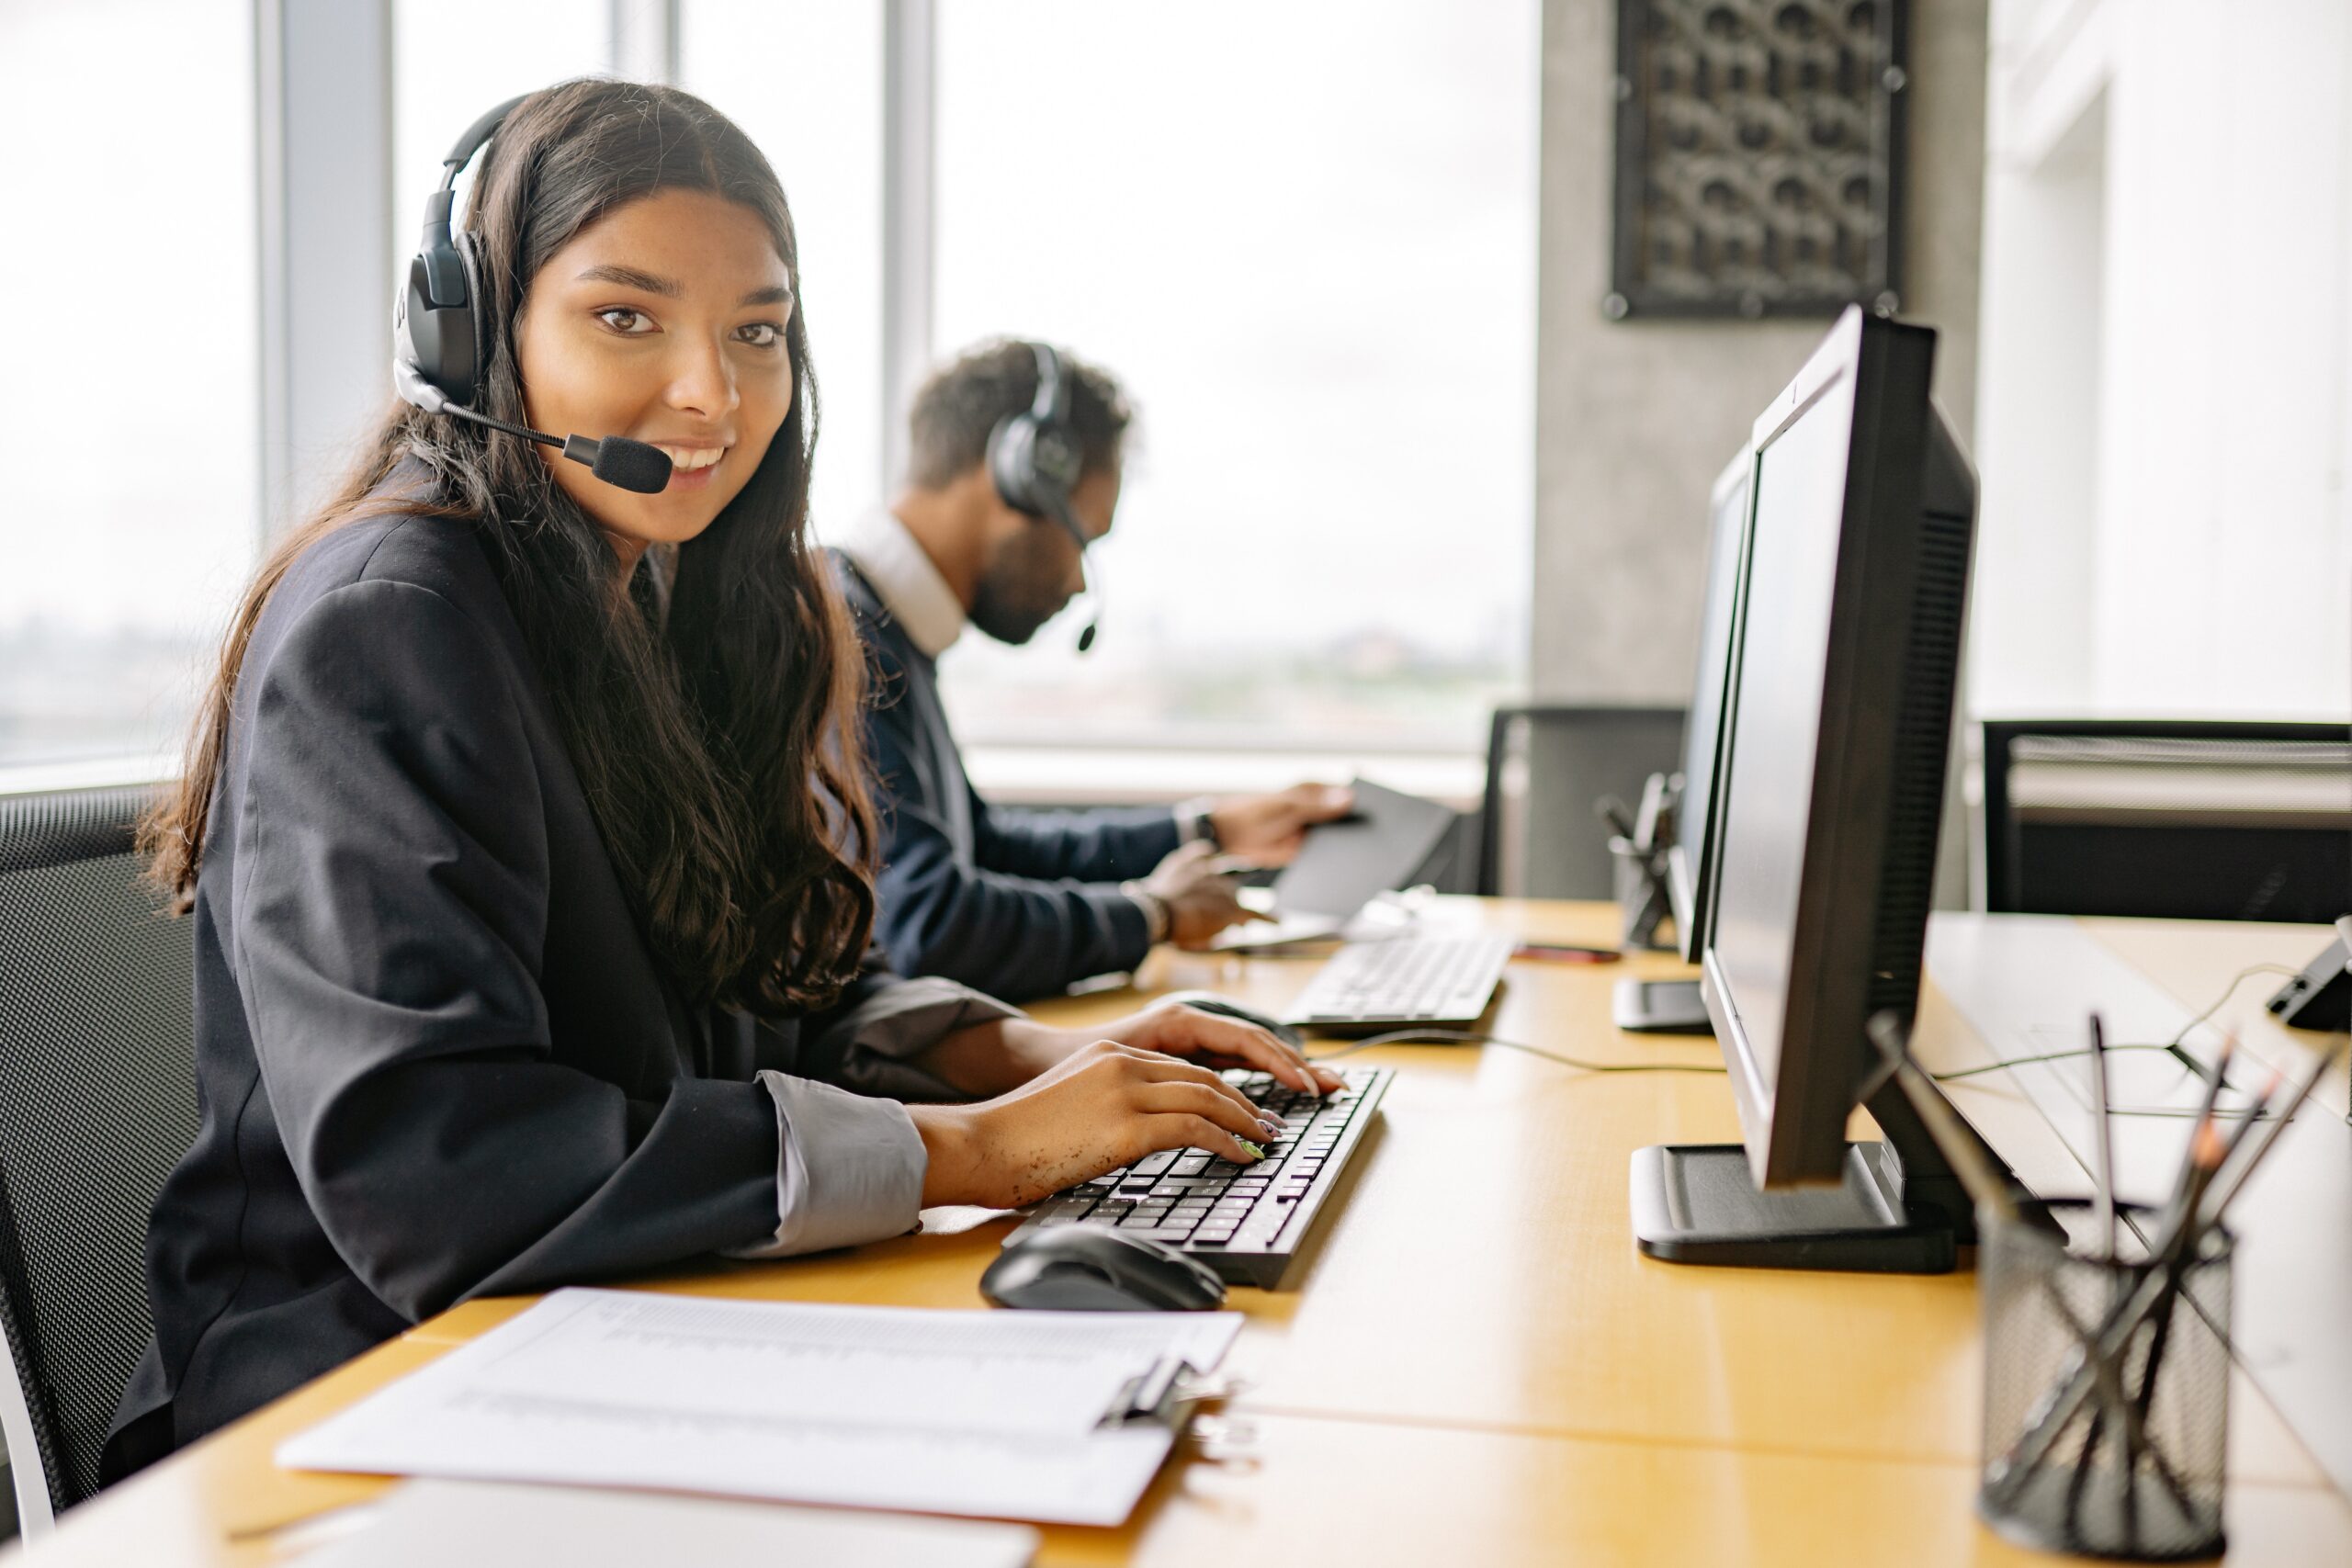 A smiling woman in a call center